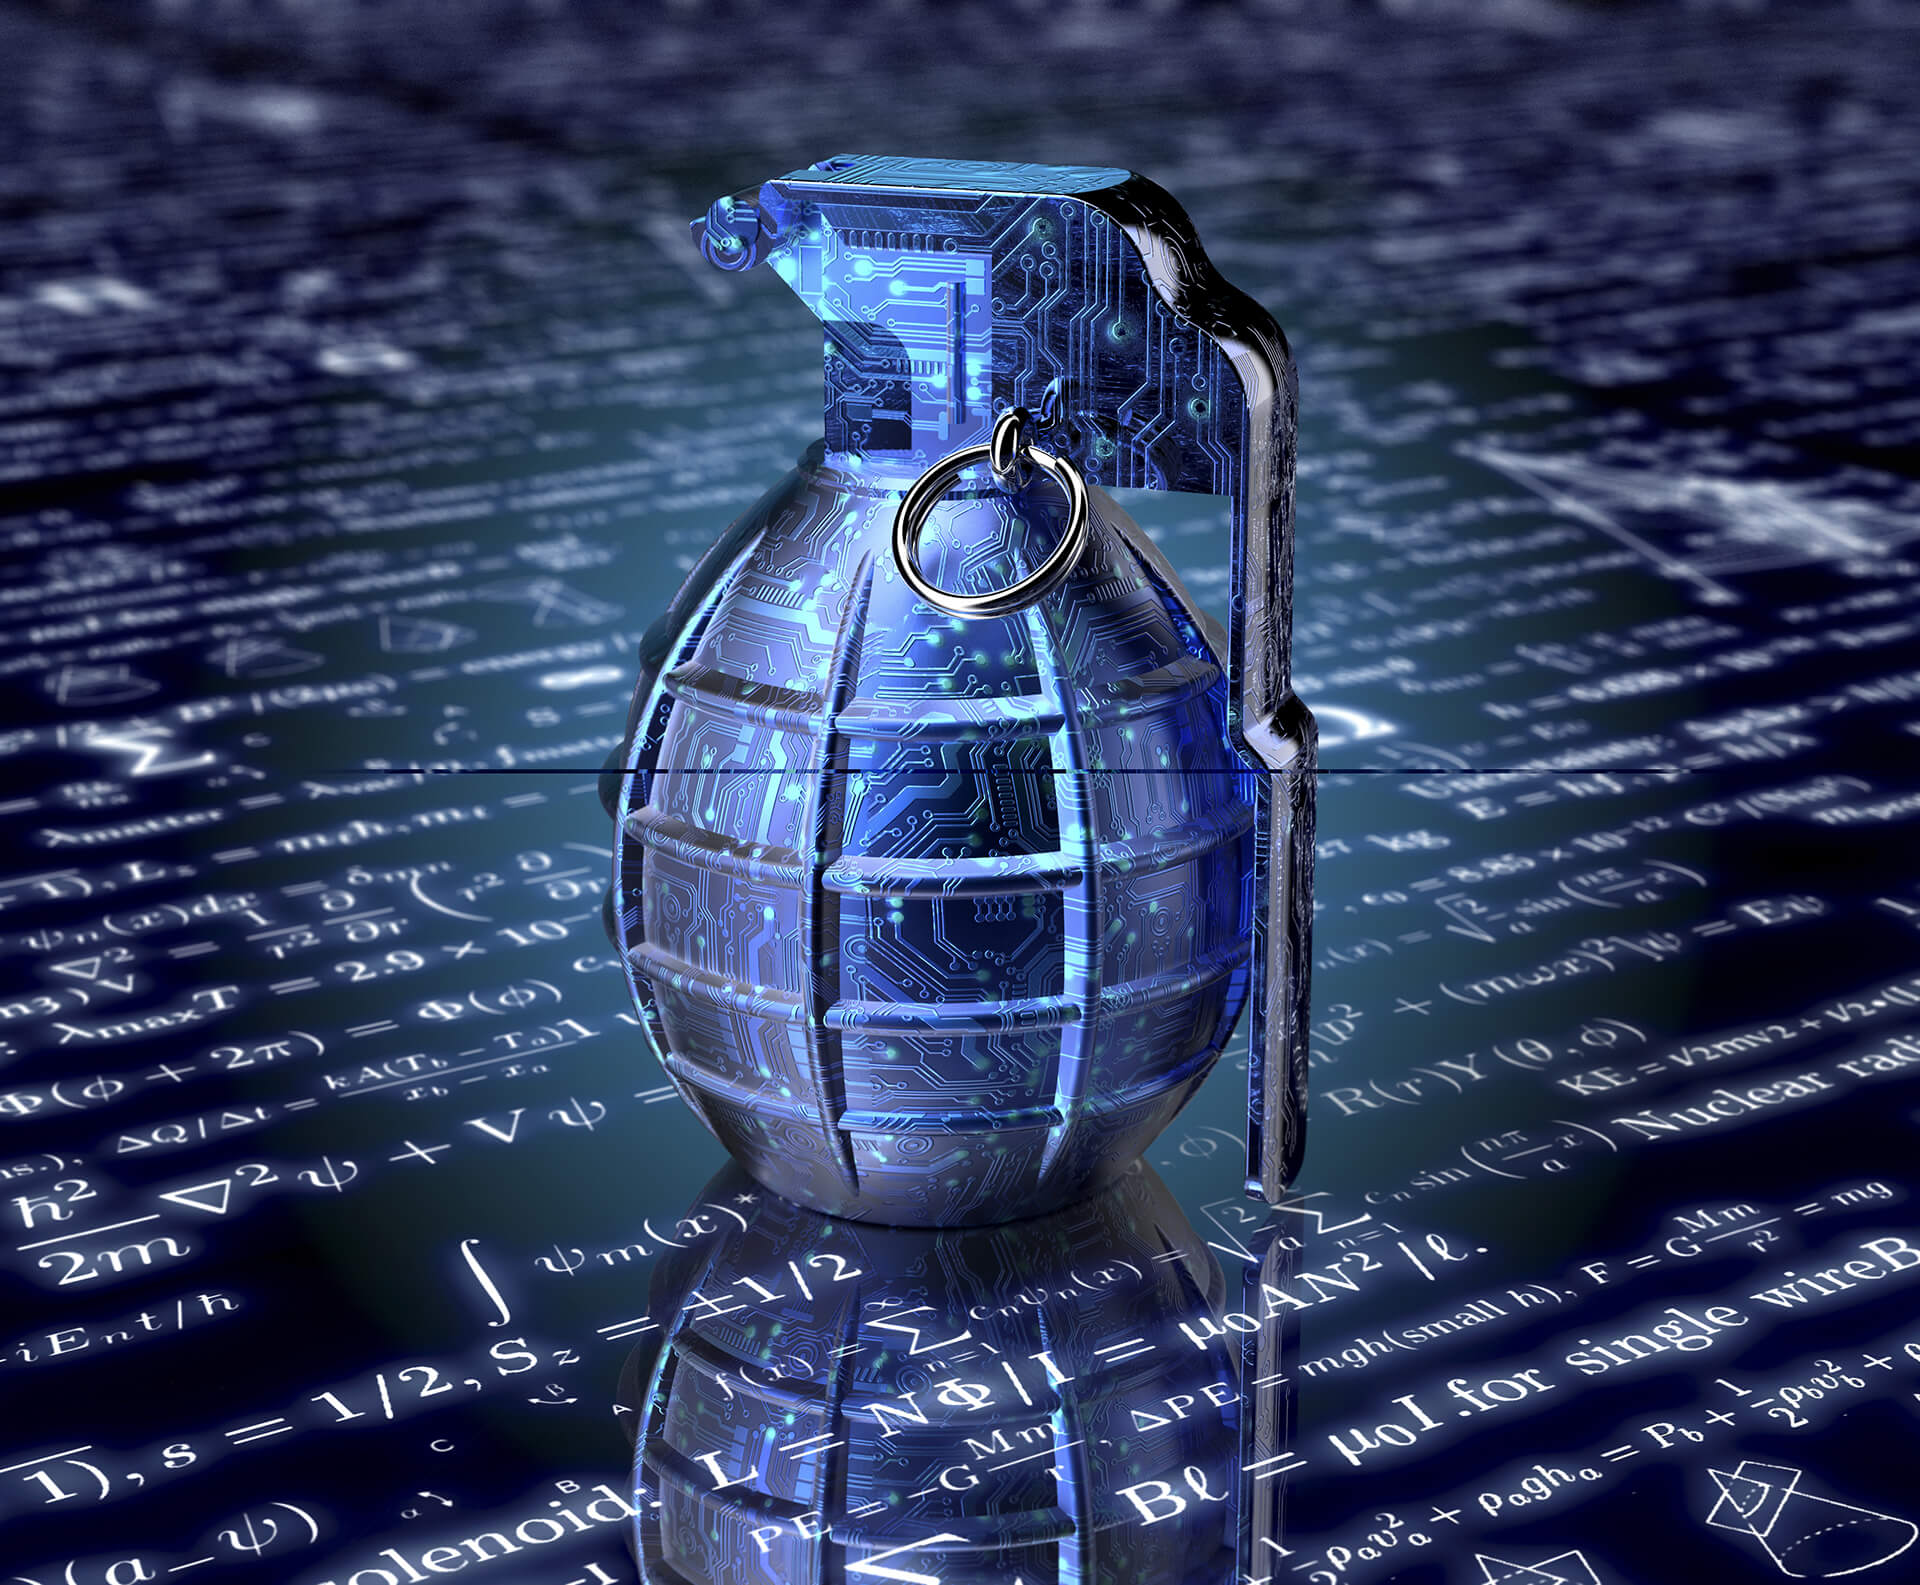 Cyber Weapons Market 2022 Disclosing Latest Trends and Advancement Outlook 2029